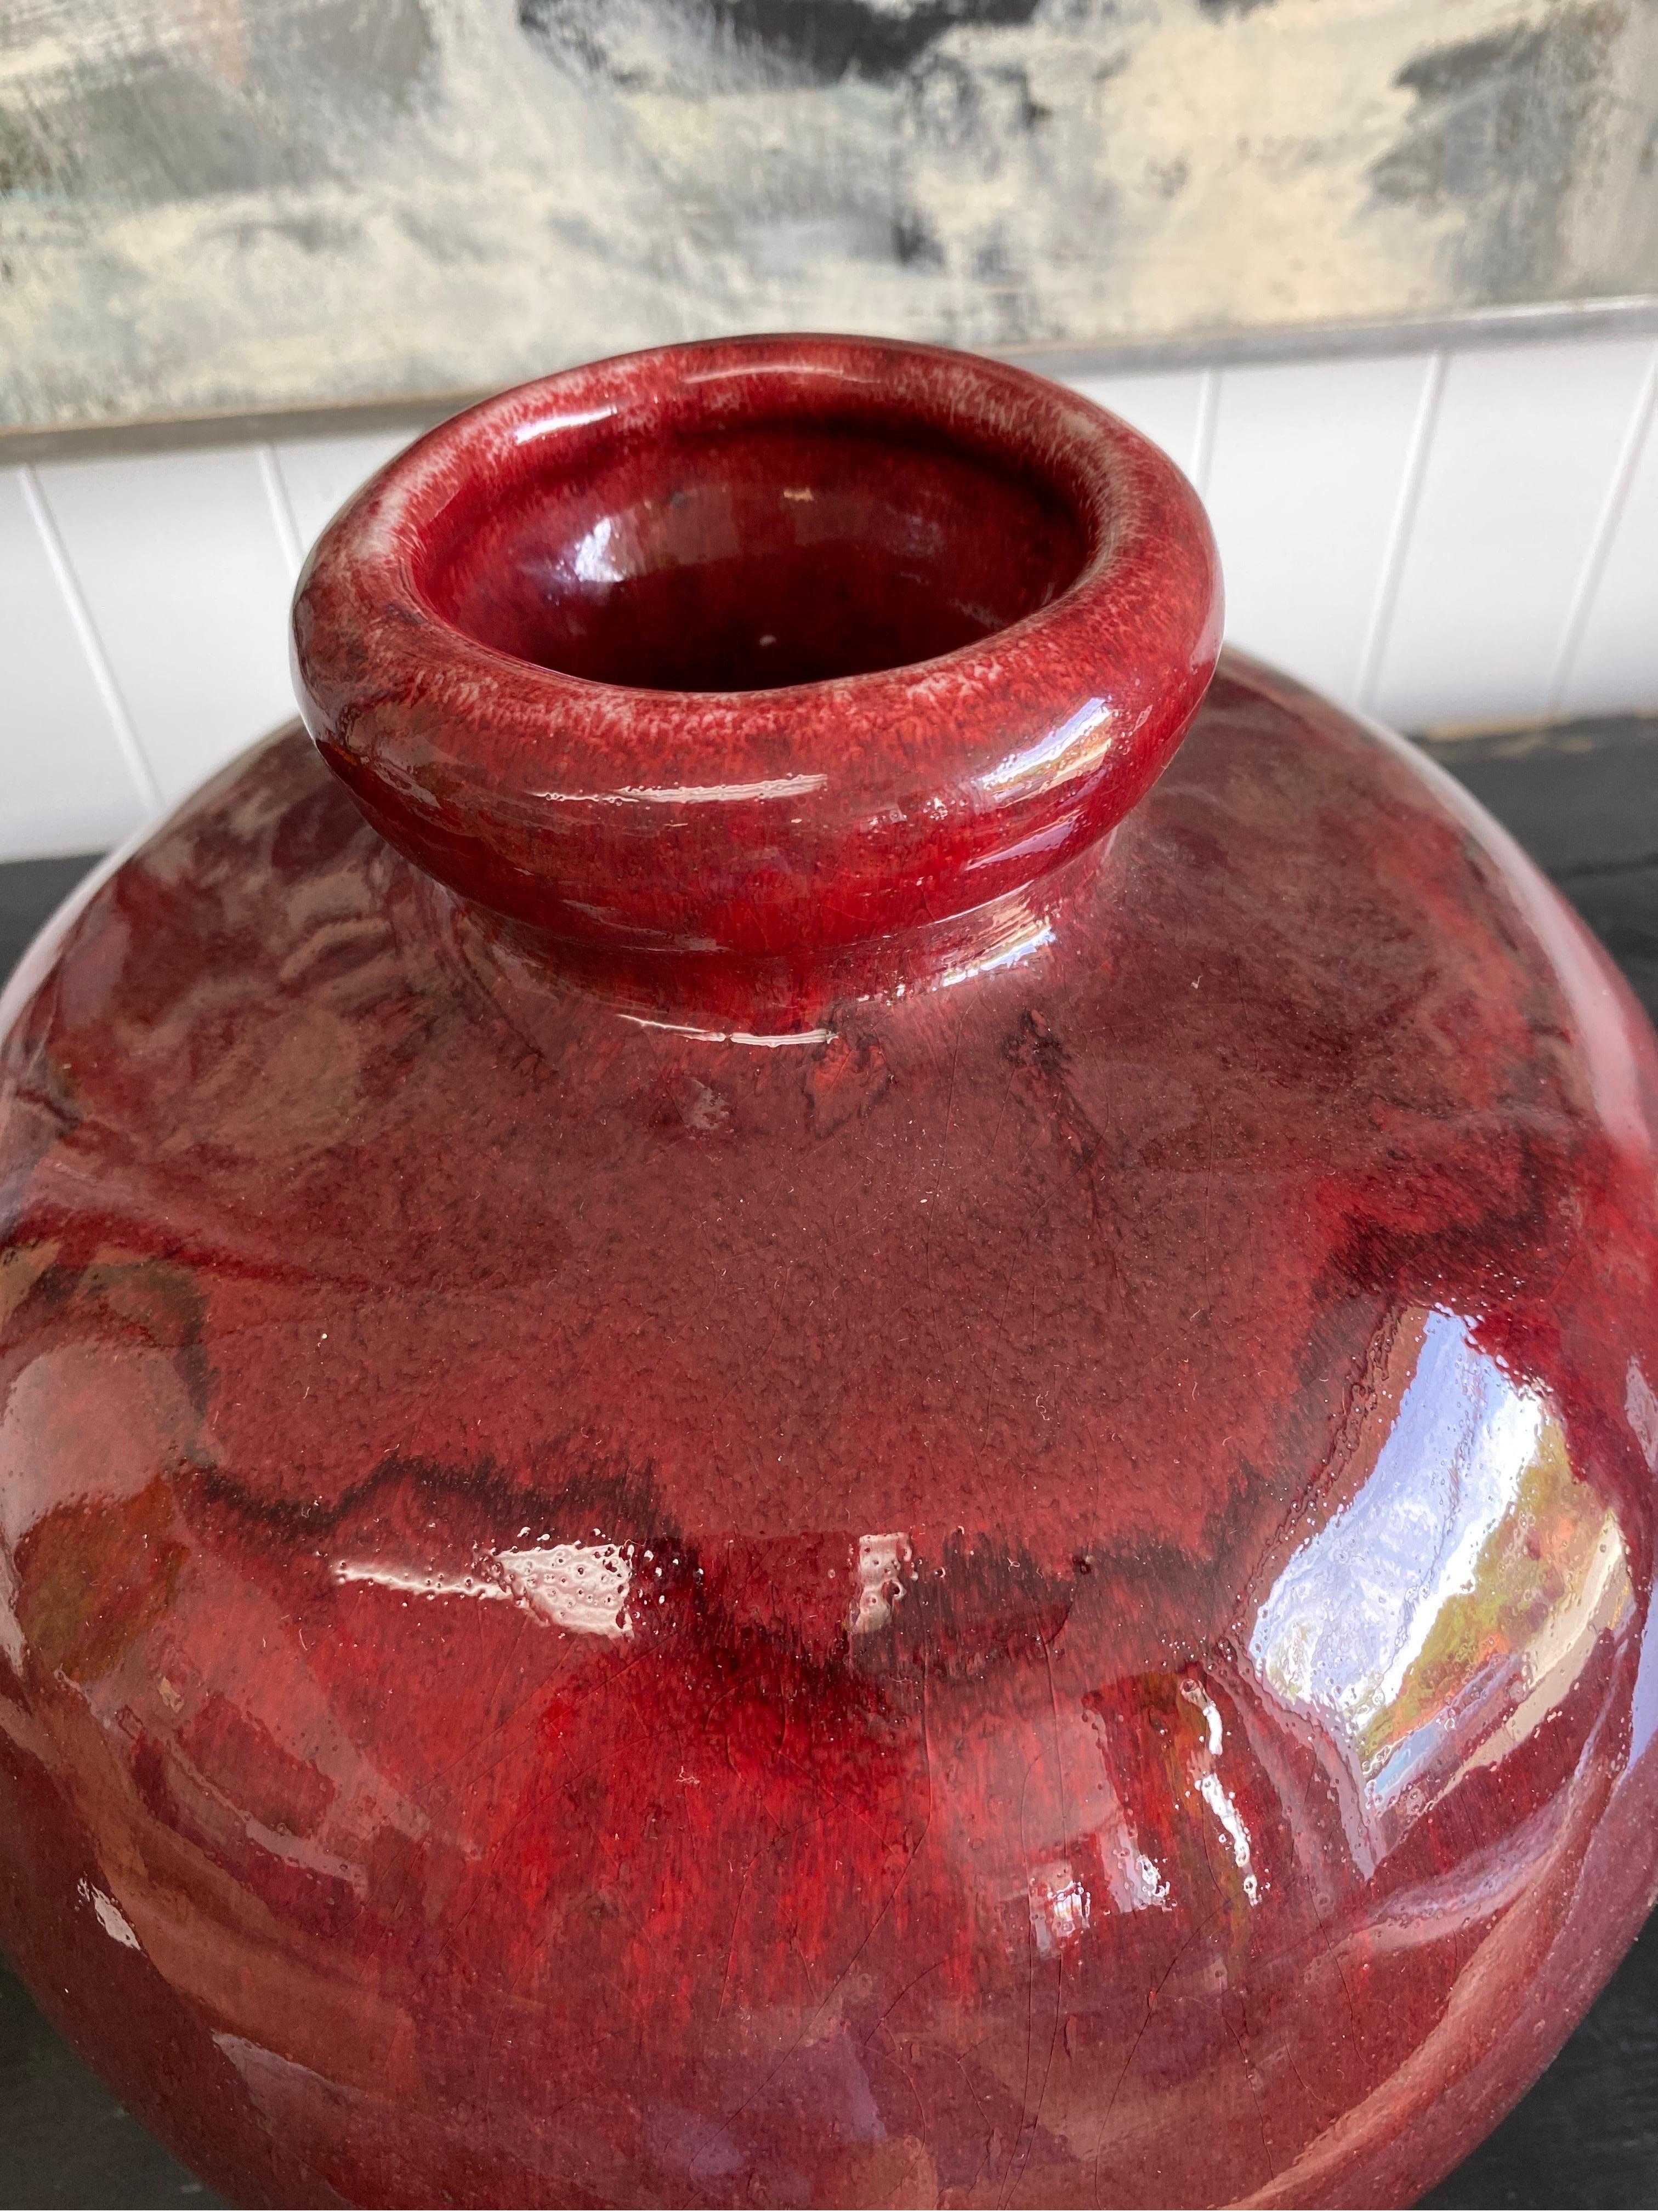 Large vintage ceramic vase by Texas ceramist Harding Black, signed and dated 1985. Self taught Harding Black was known for his extensive glaze research and techniques. This pottery piece is a deep red and shows drip glaze towards the bottom of the